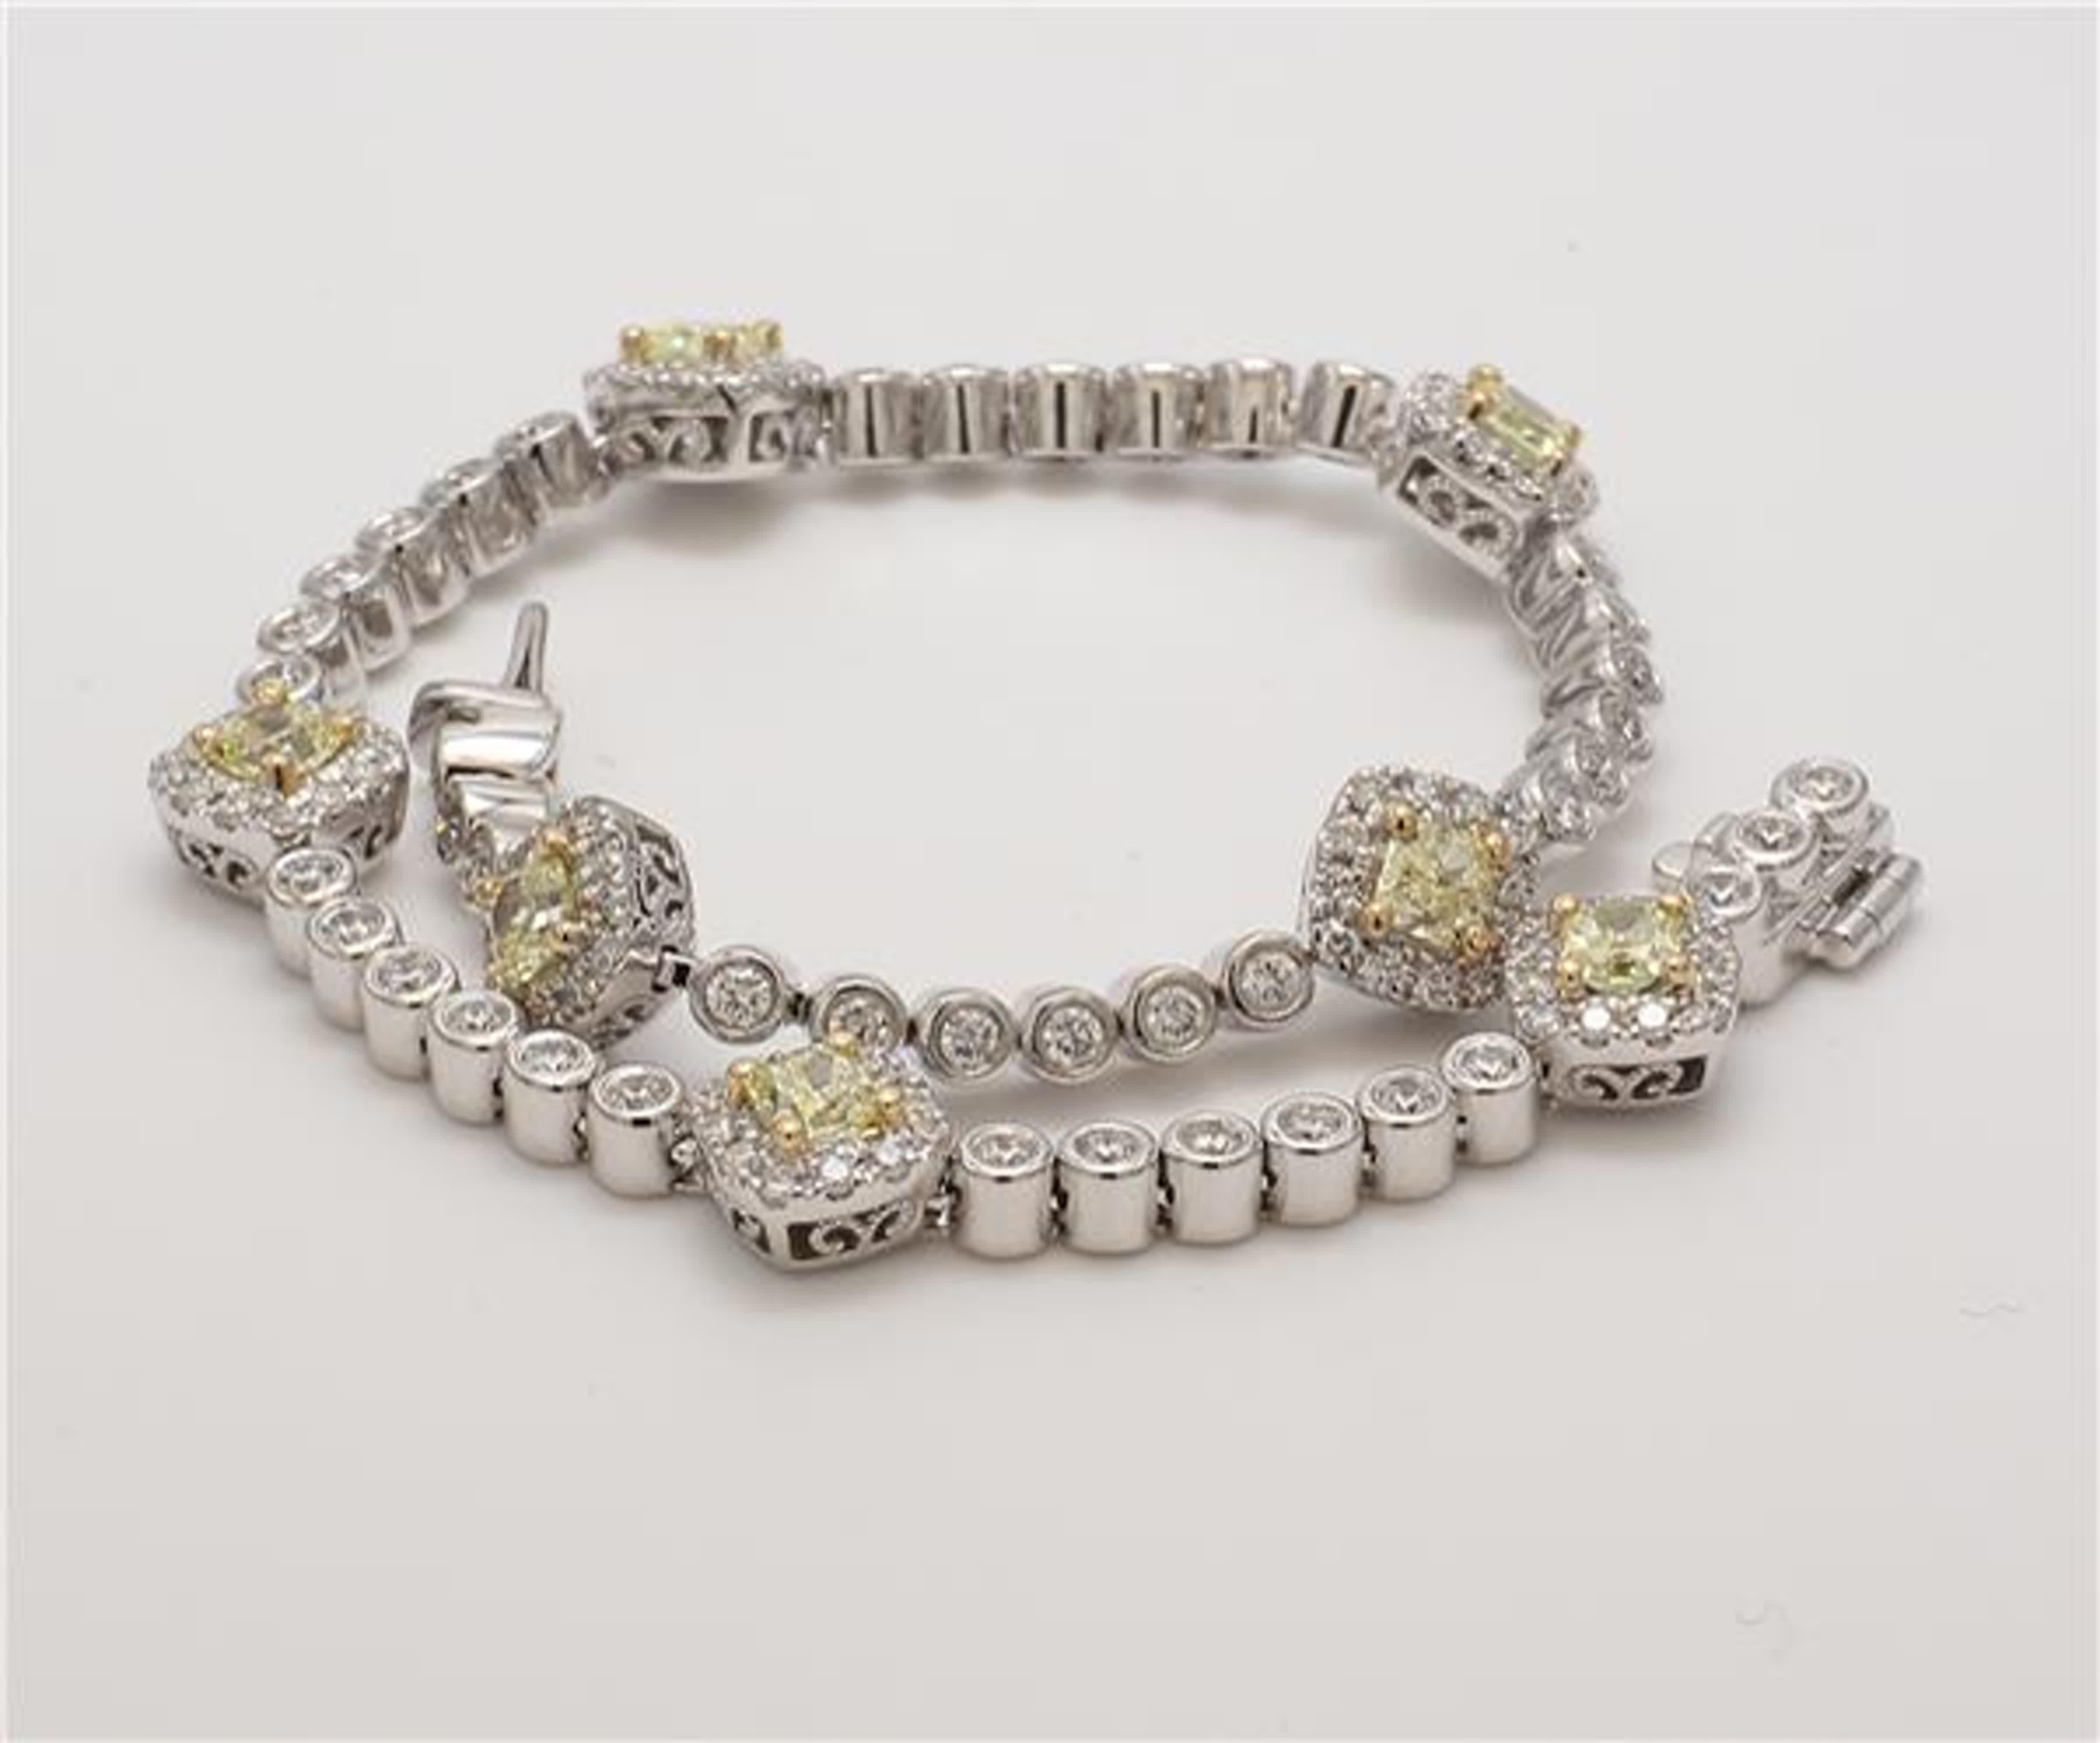 RareGemWorld's classic natural radiant cut yellow diamond bracelet. Mounted in a beautiful 14K Yellow and White Gold setting with 7 natural radiant cut yellow diamonds. The yellow diamonds are surrounded by small round natural white diamond melee as